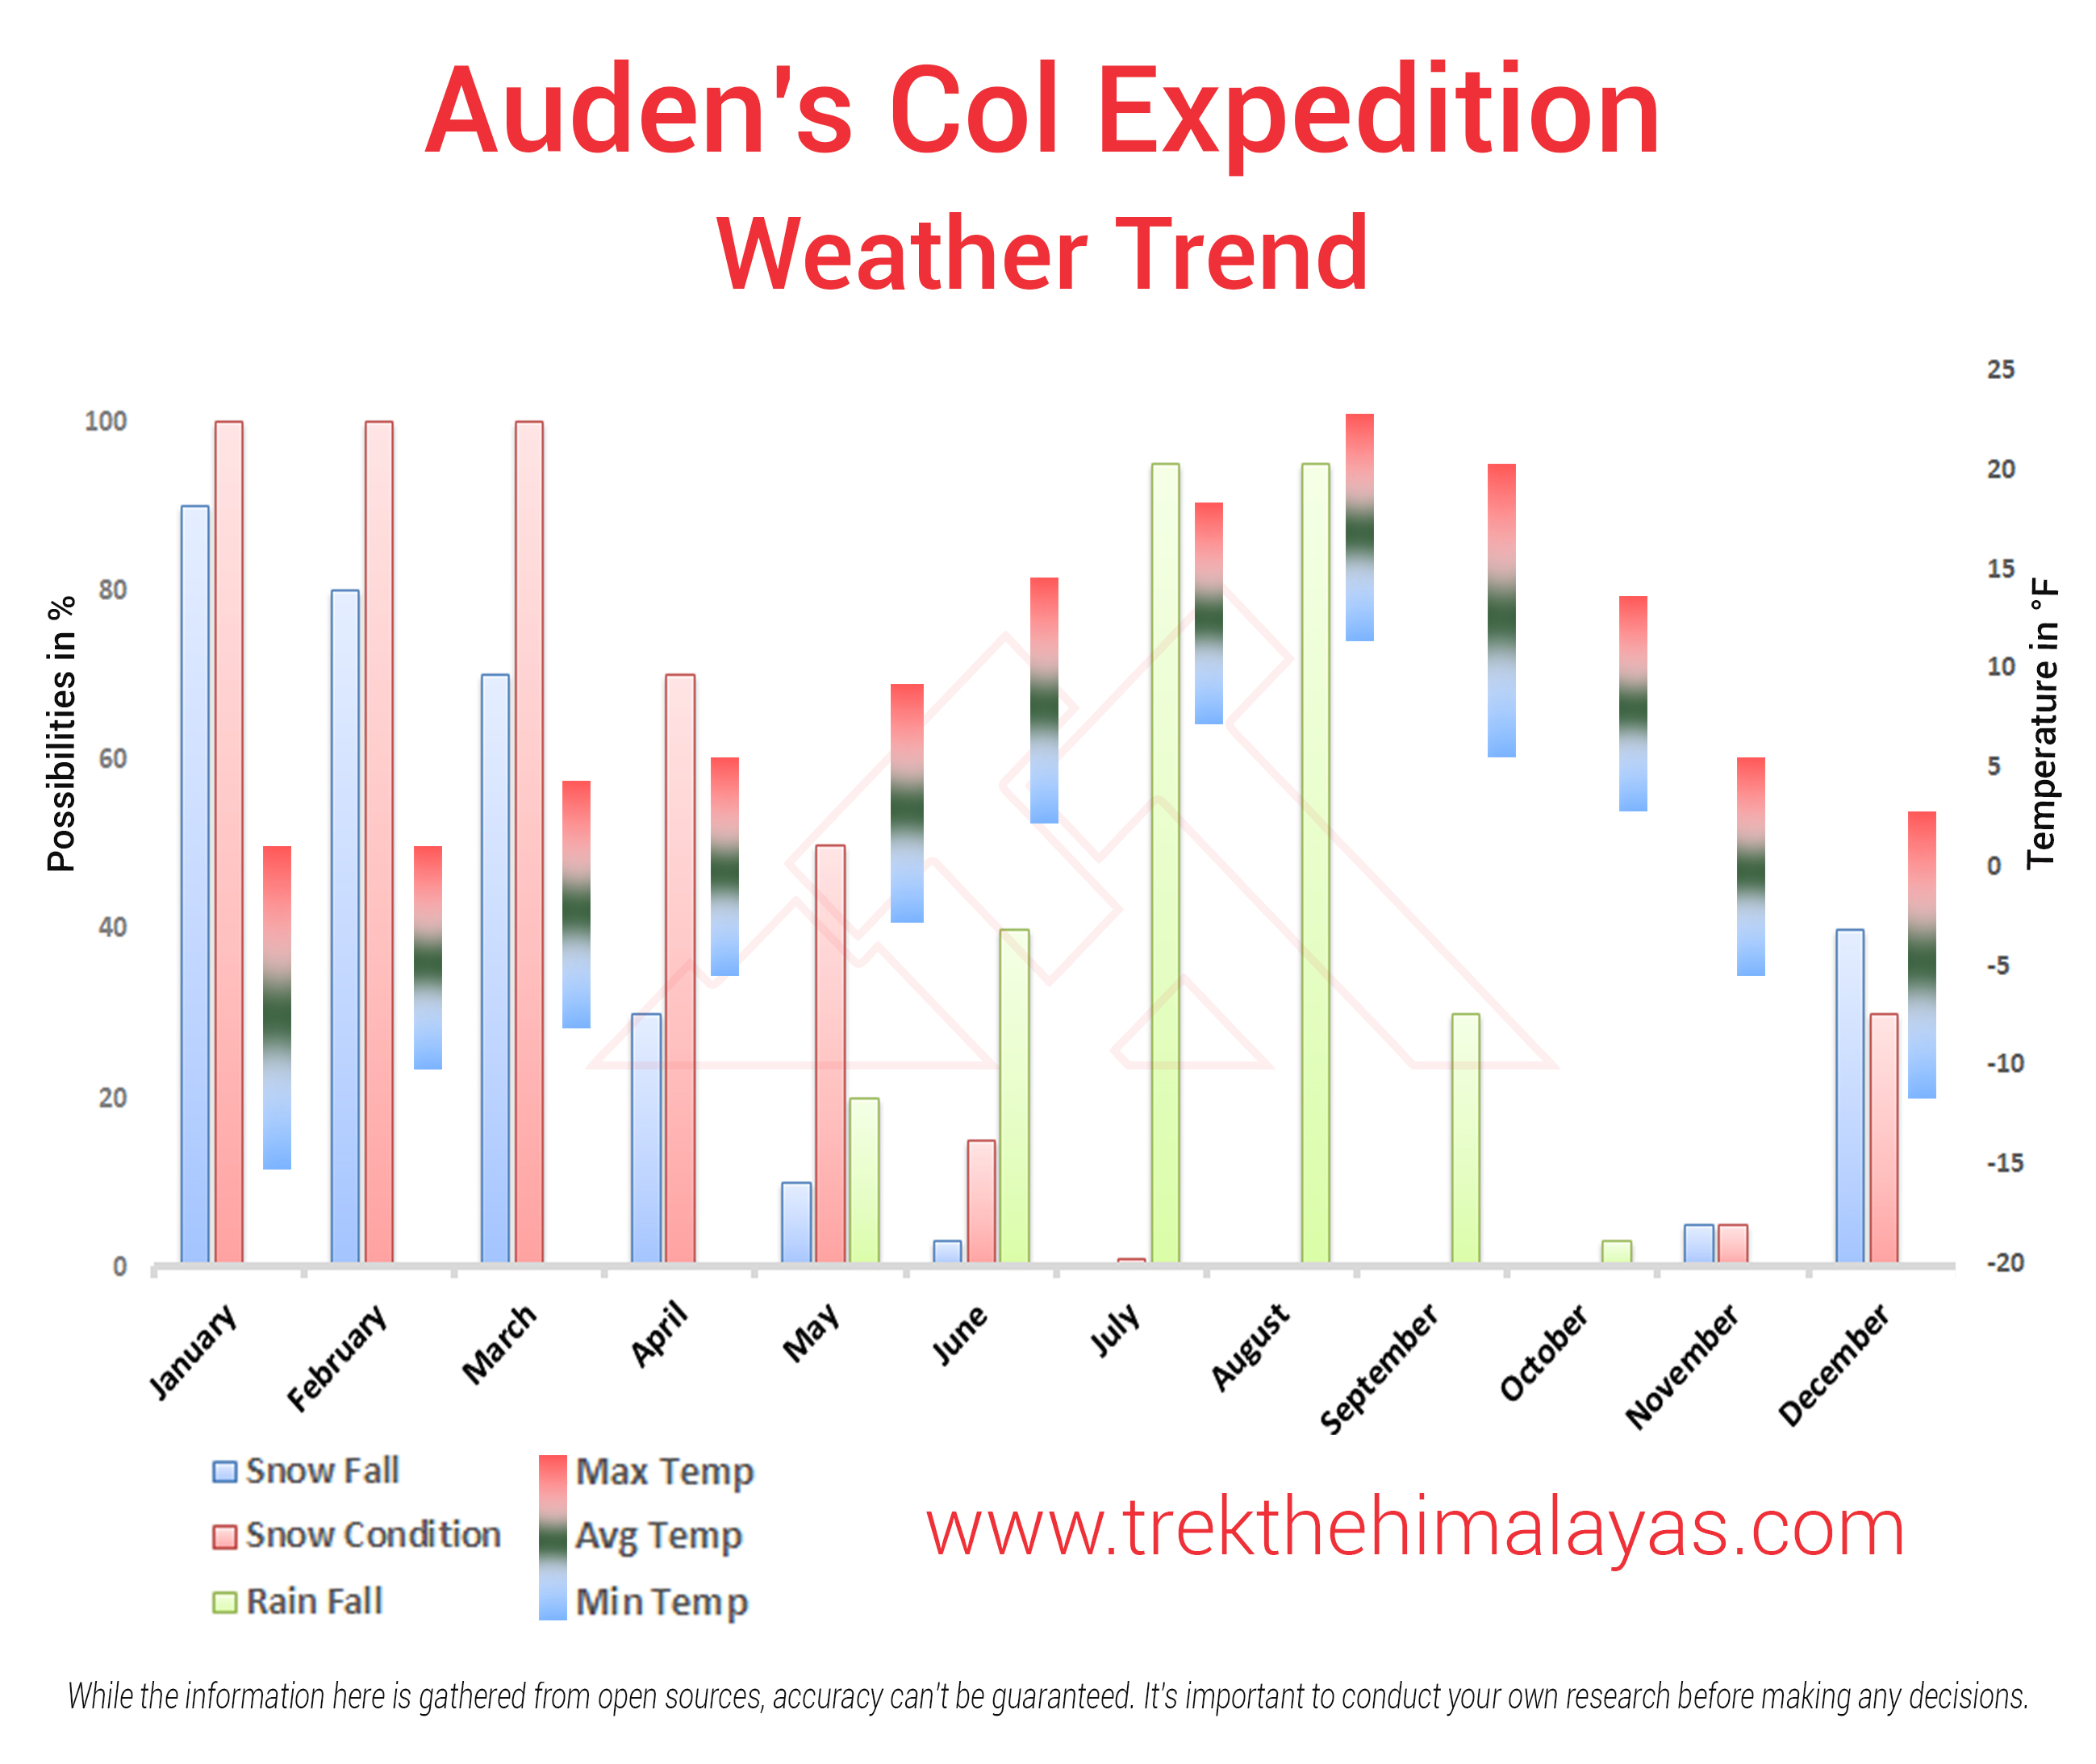 Auden's Col Expedition Maps